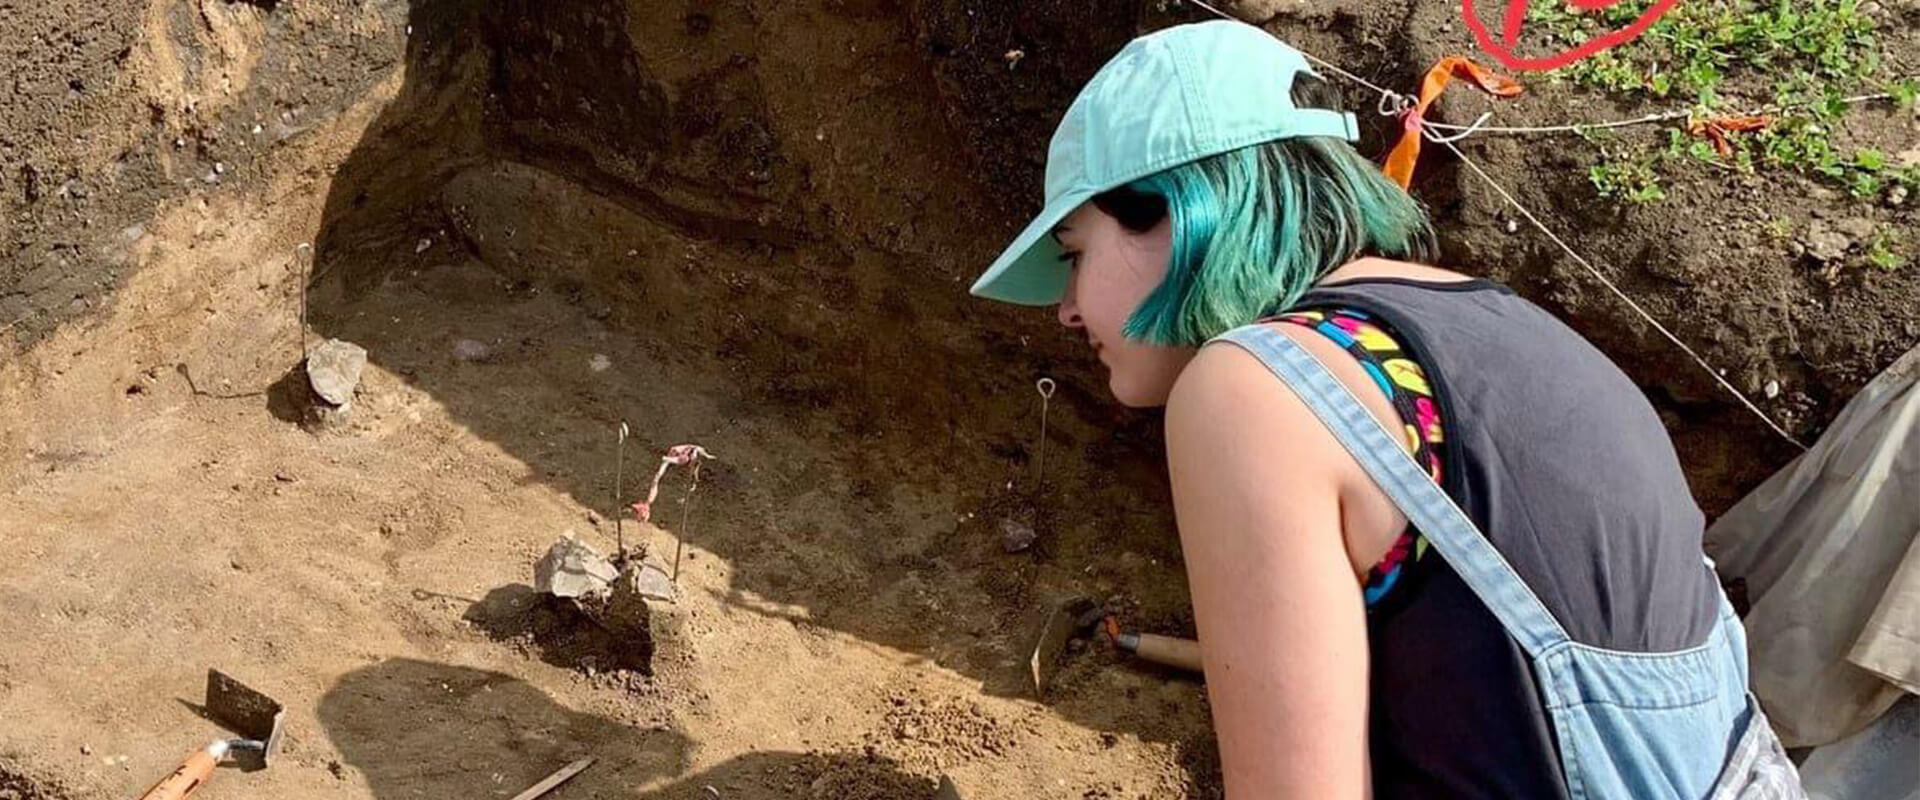 Public History student Glory Turnbull on a dig